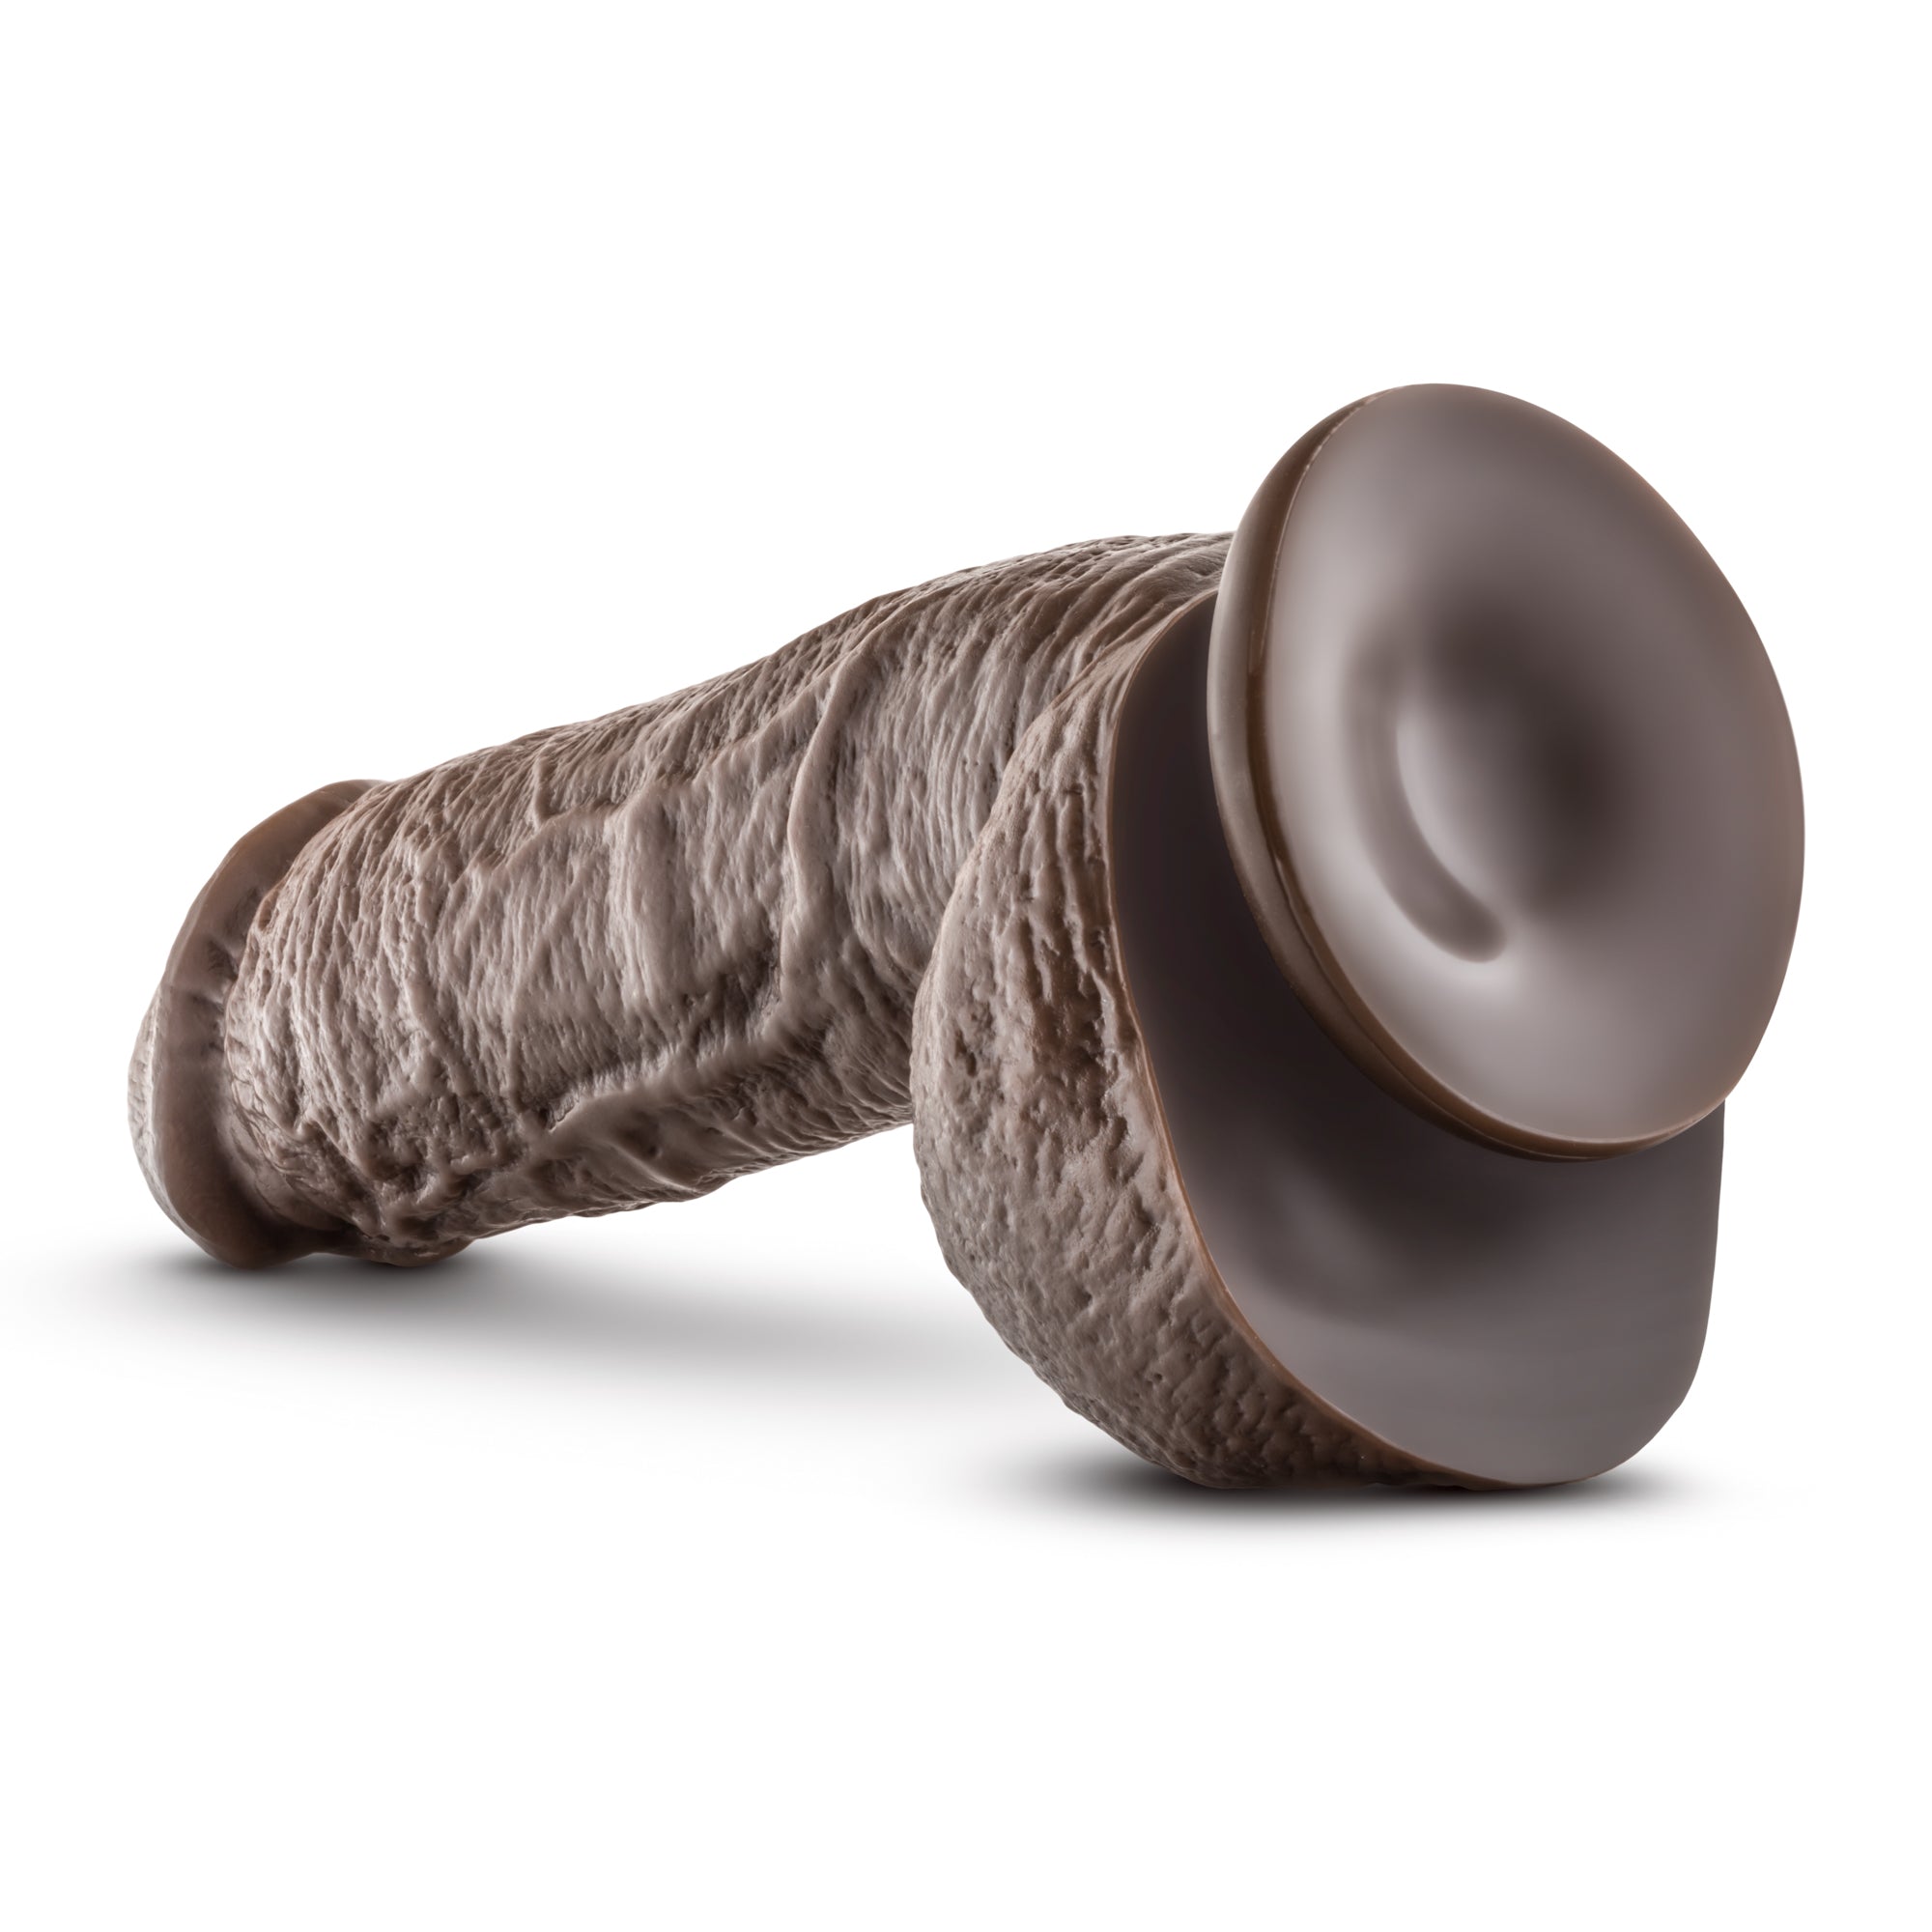 Dr. Skin's Mr. D: 8.5 Inch Thick Chocolate Dildo with Suction Base